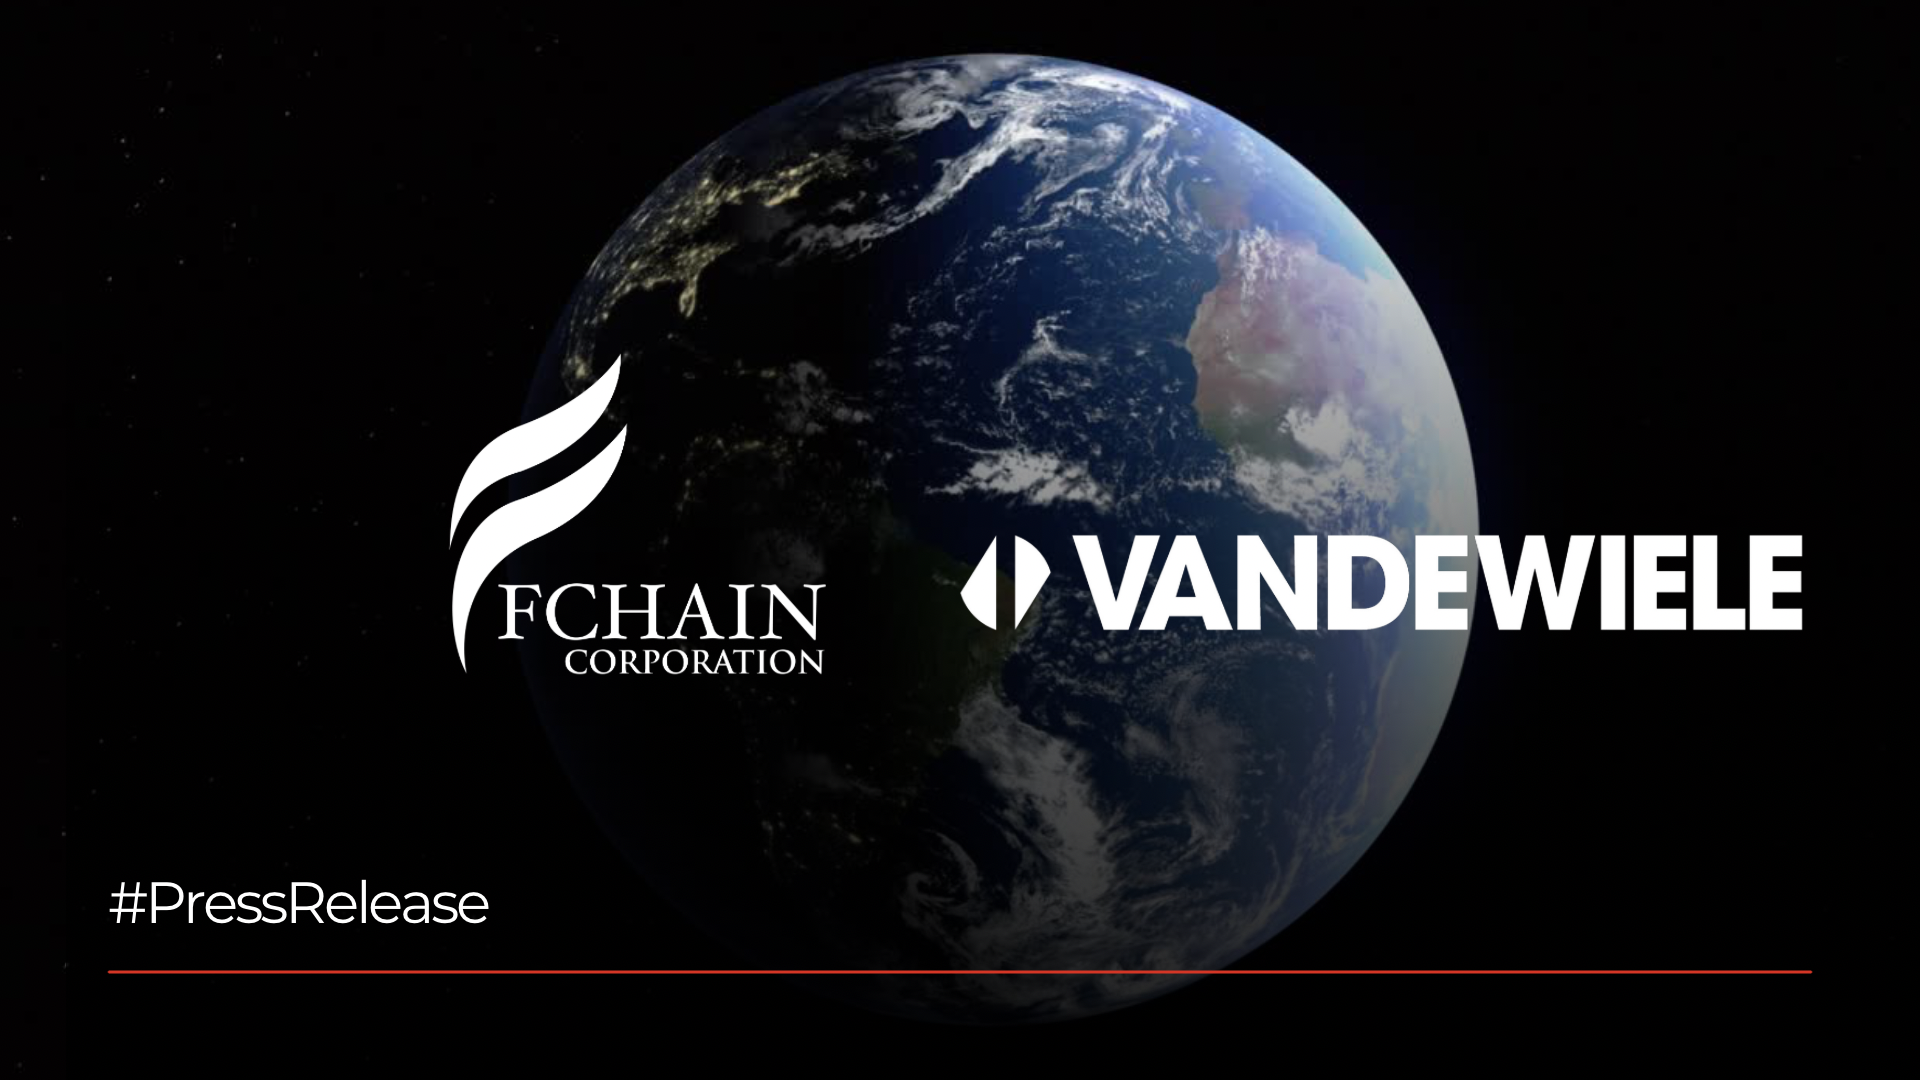 Vandewiele Group Partners with FCHAIN Corporation’s Tashkent Branch to Drive Global Growth